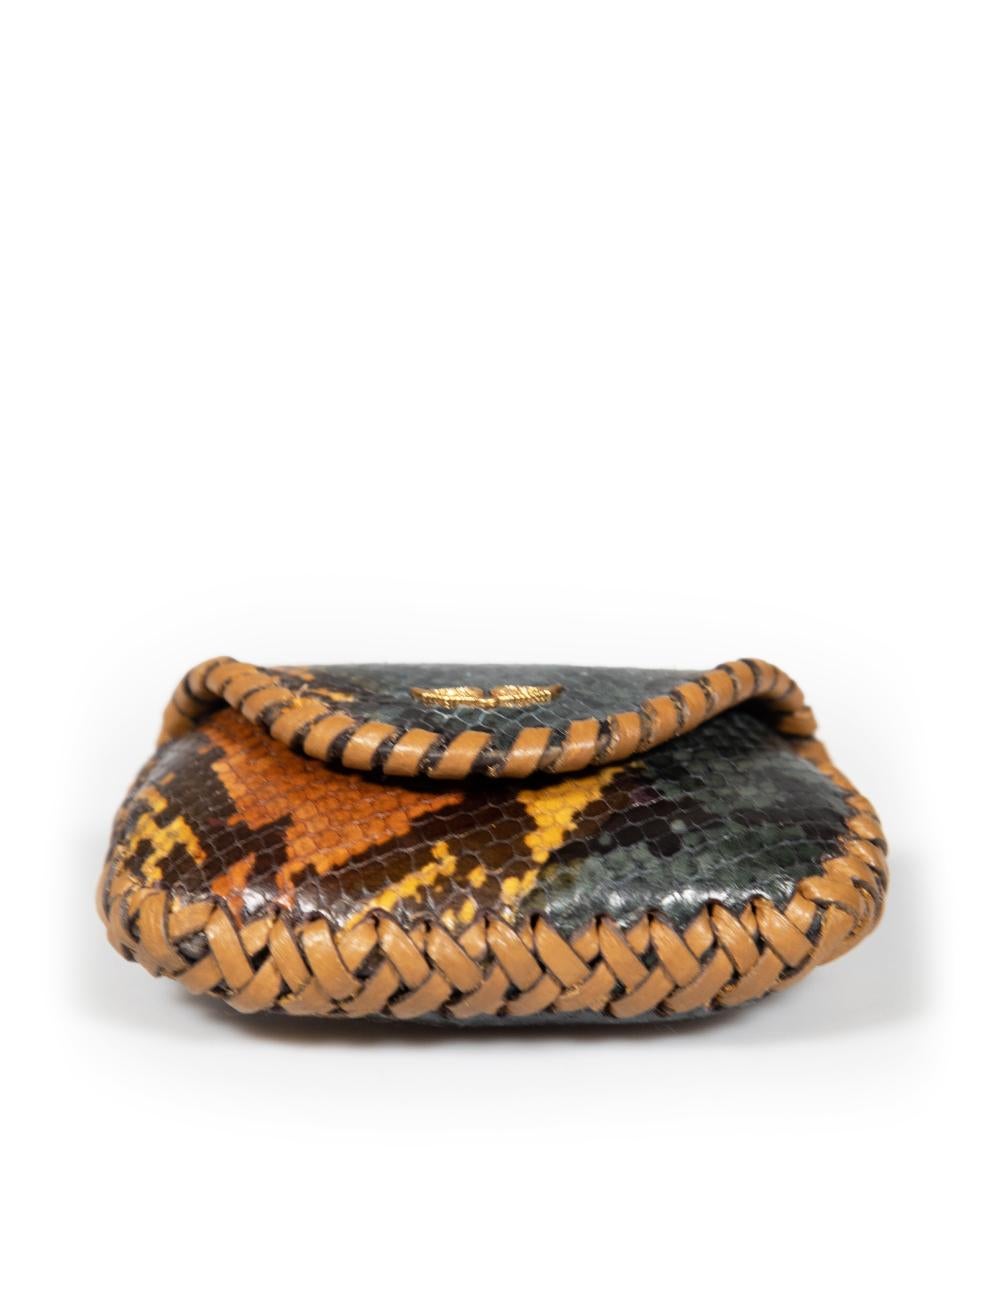 Women's Zadig & Voltaire Snakeskin Coin Purse For Sale